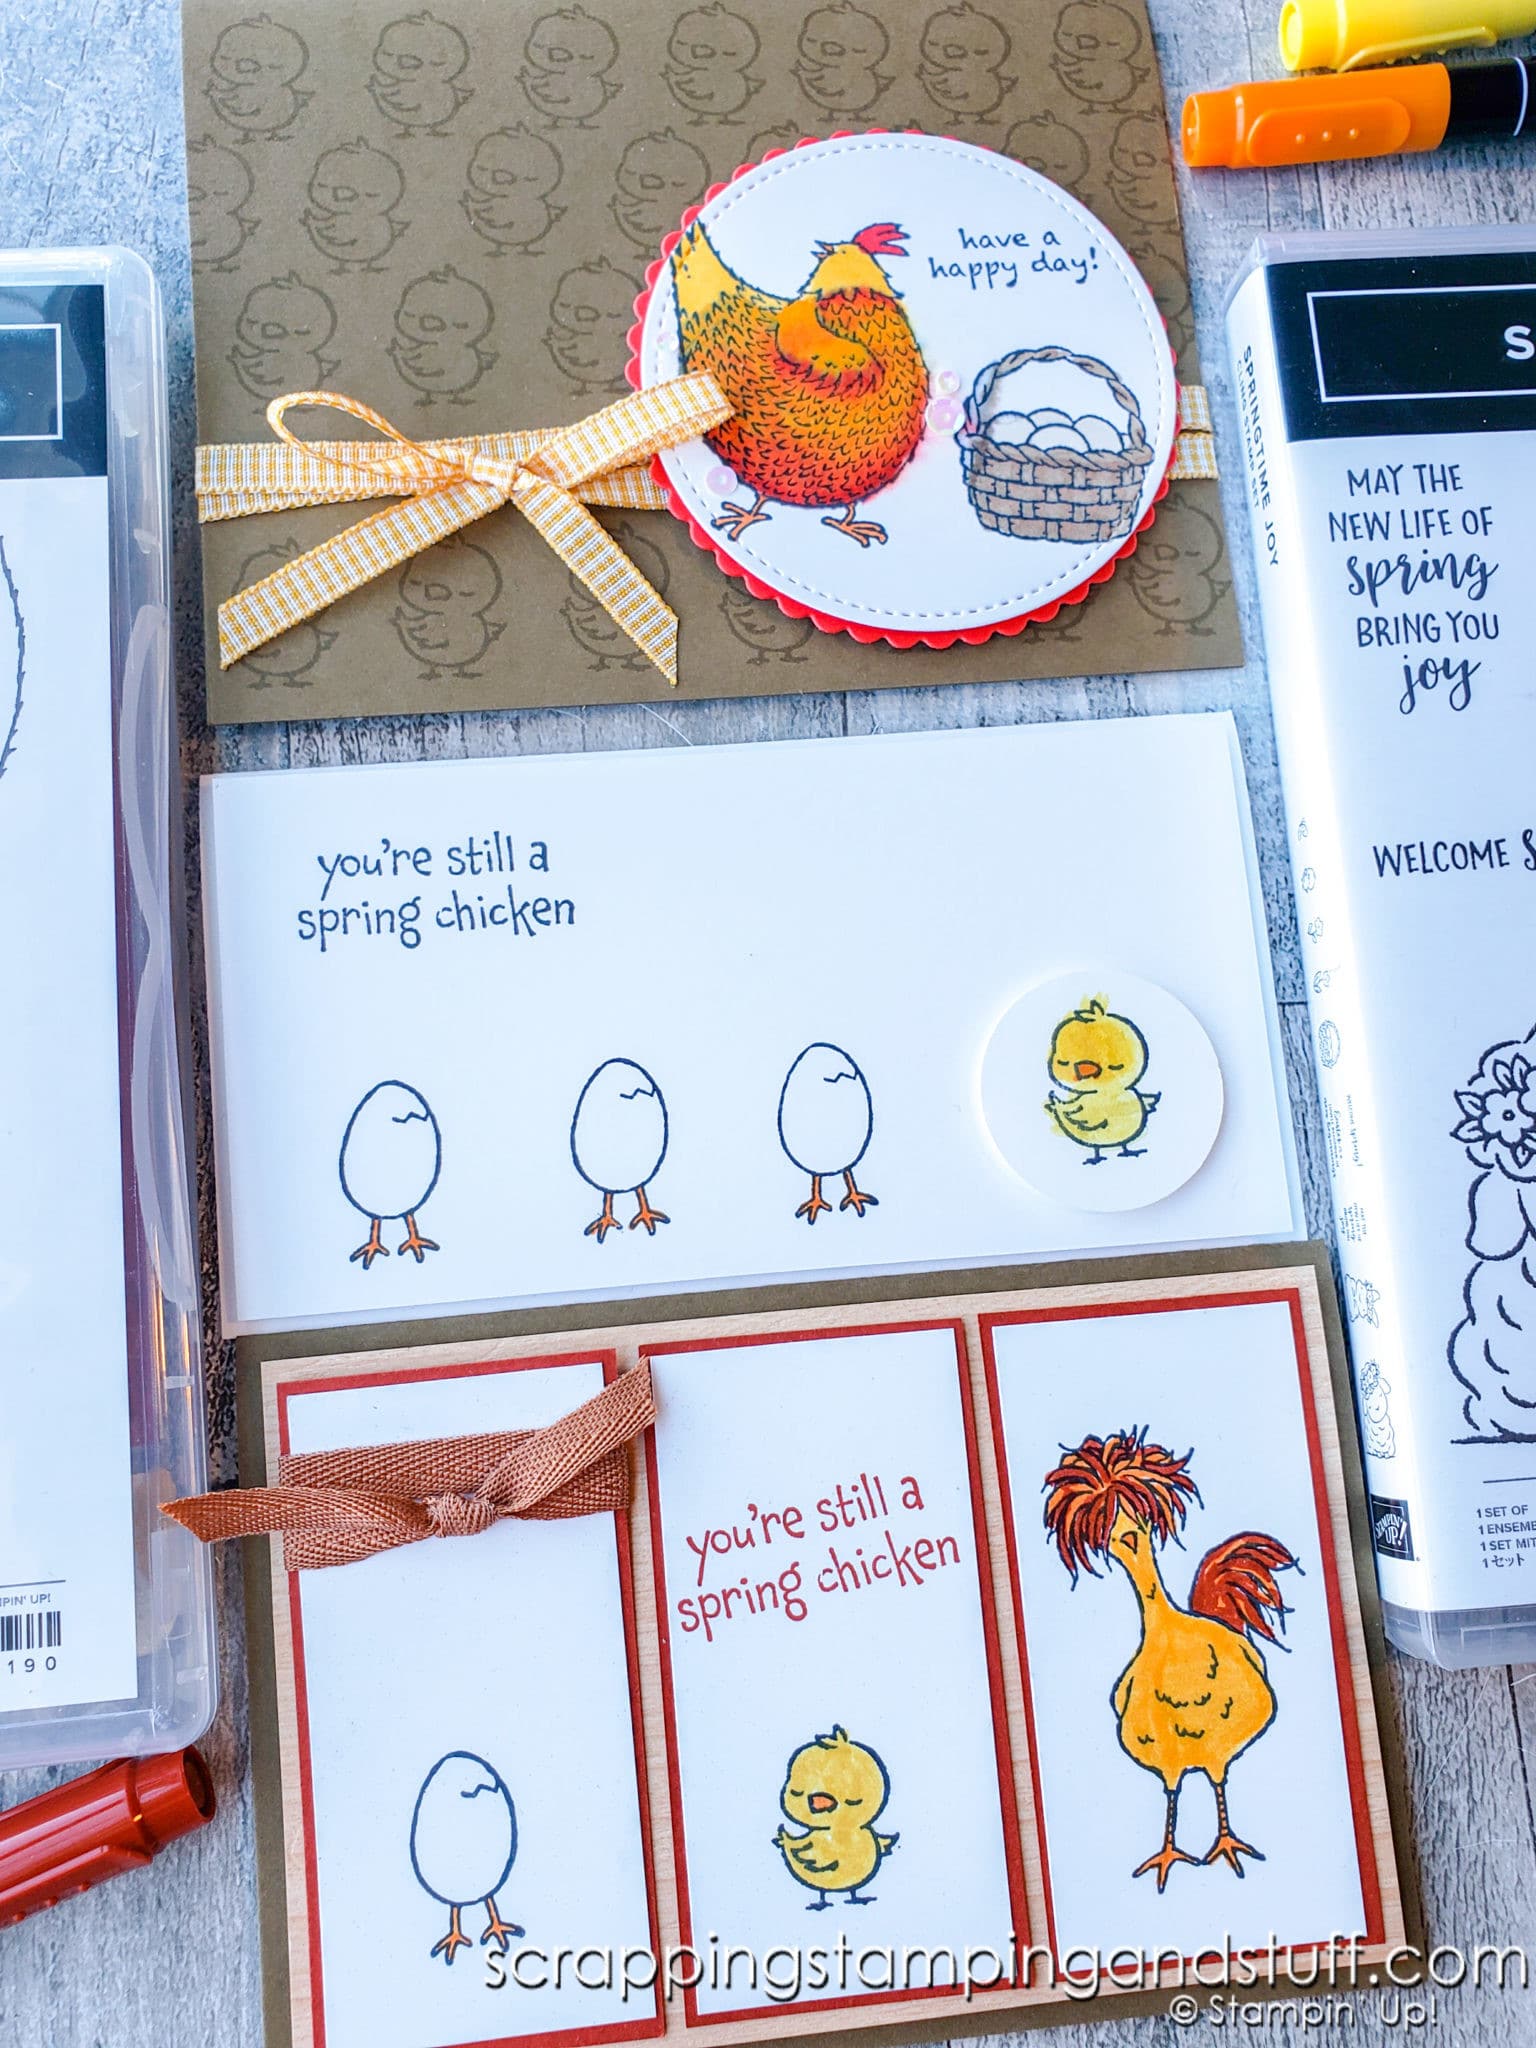 Make Cute Chicken Cards with the Hey Chick & Springtime Joy Stamp Sets